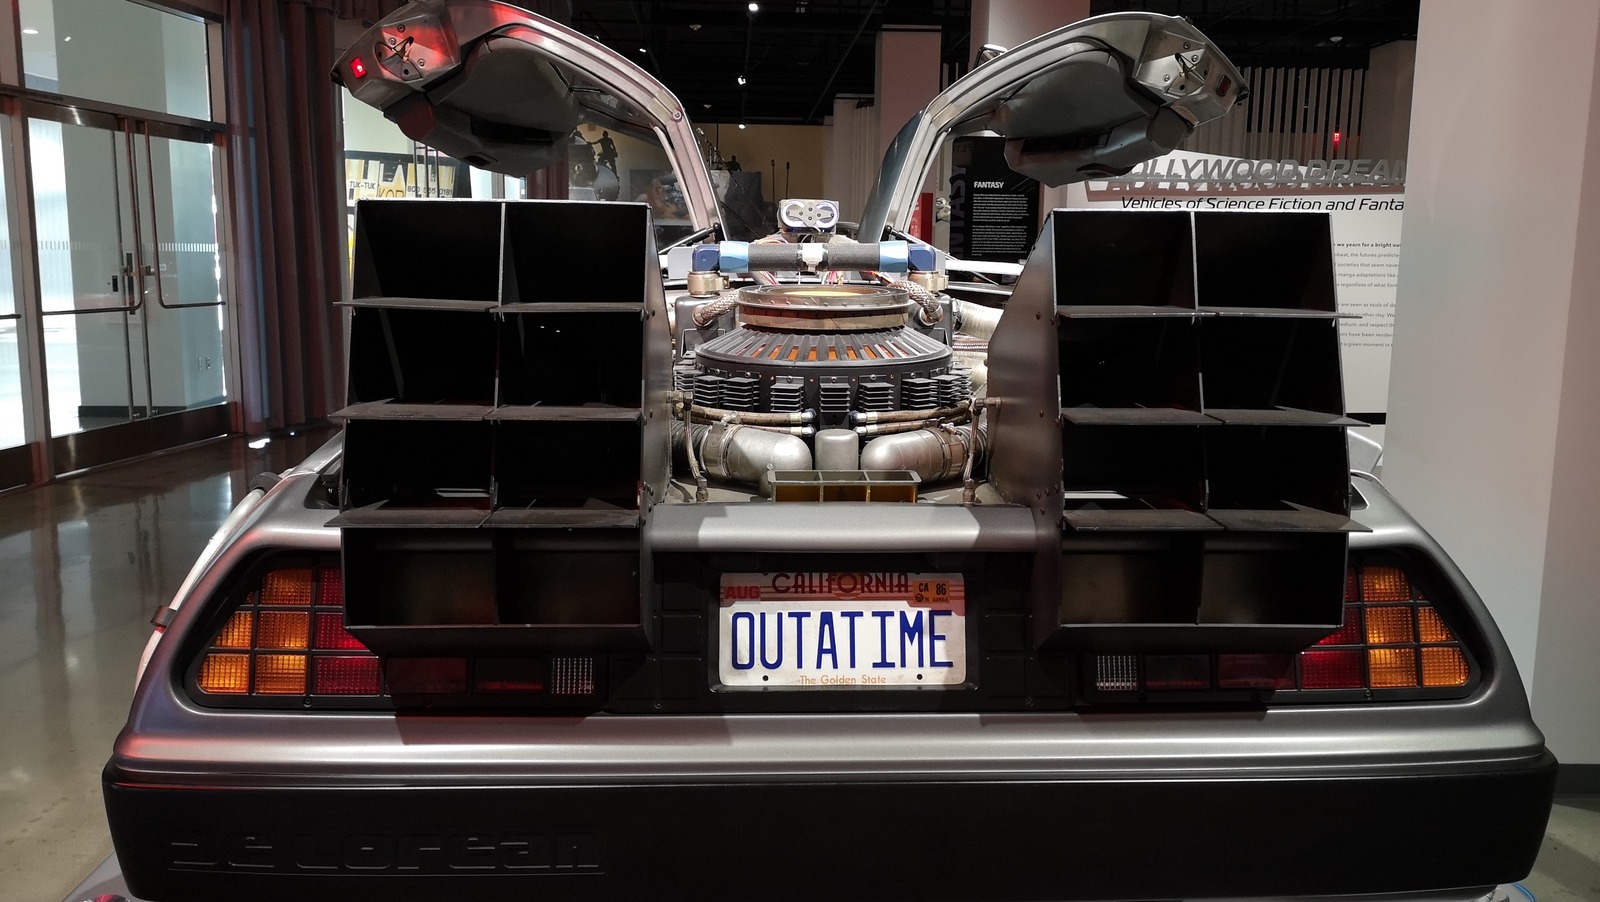 Here's What Happened To The 'Back To The Future' DeLorean That Was